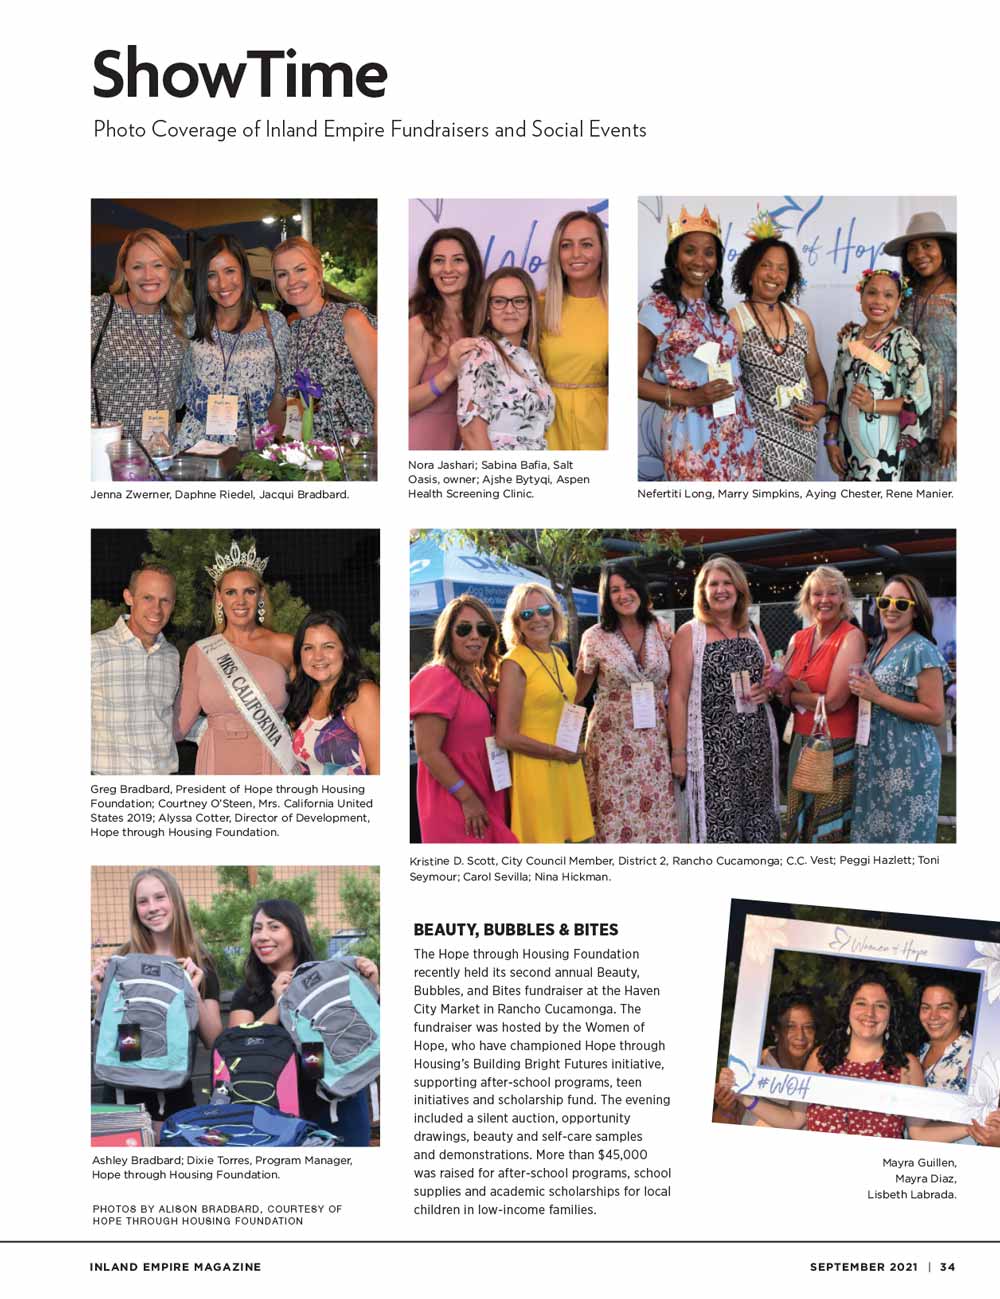 Beauty, Bubbles & Bites feature in Inland Empire Magazine